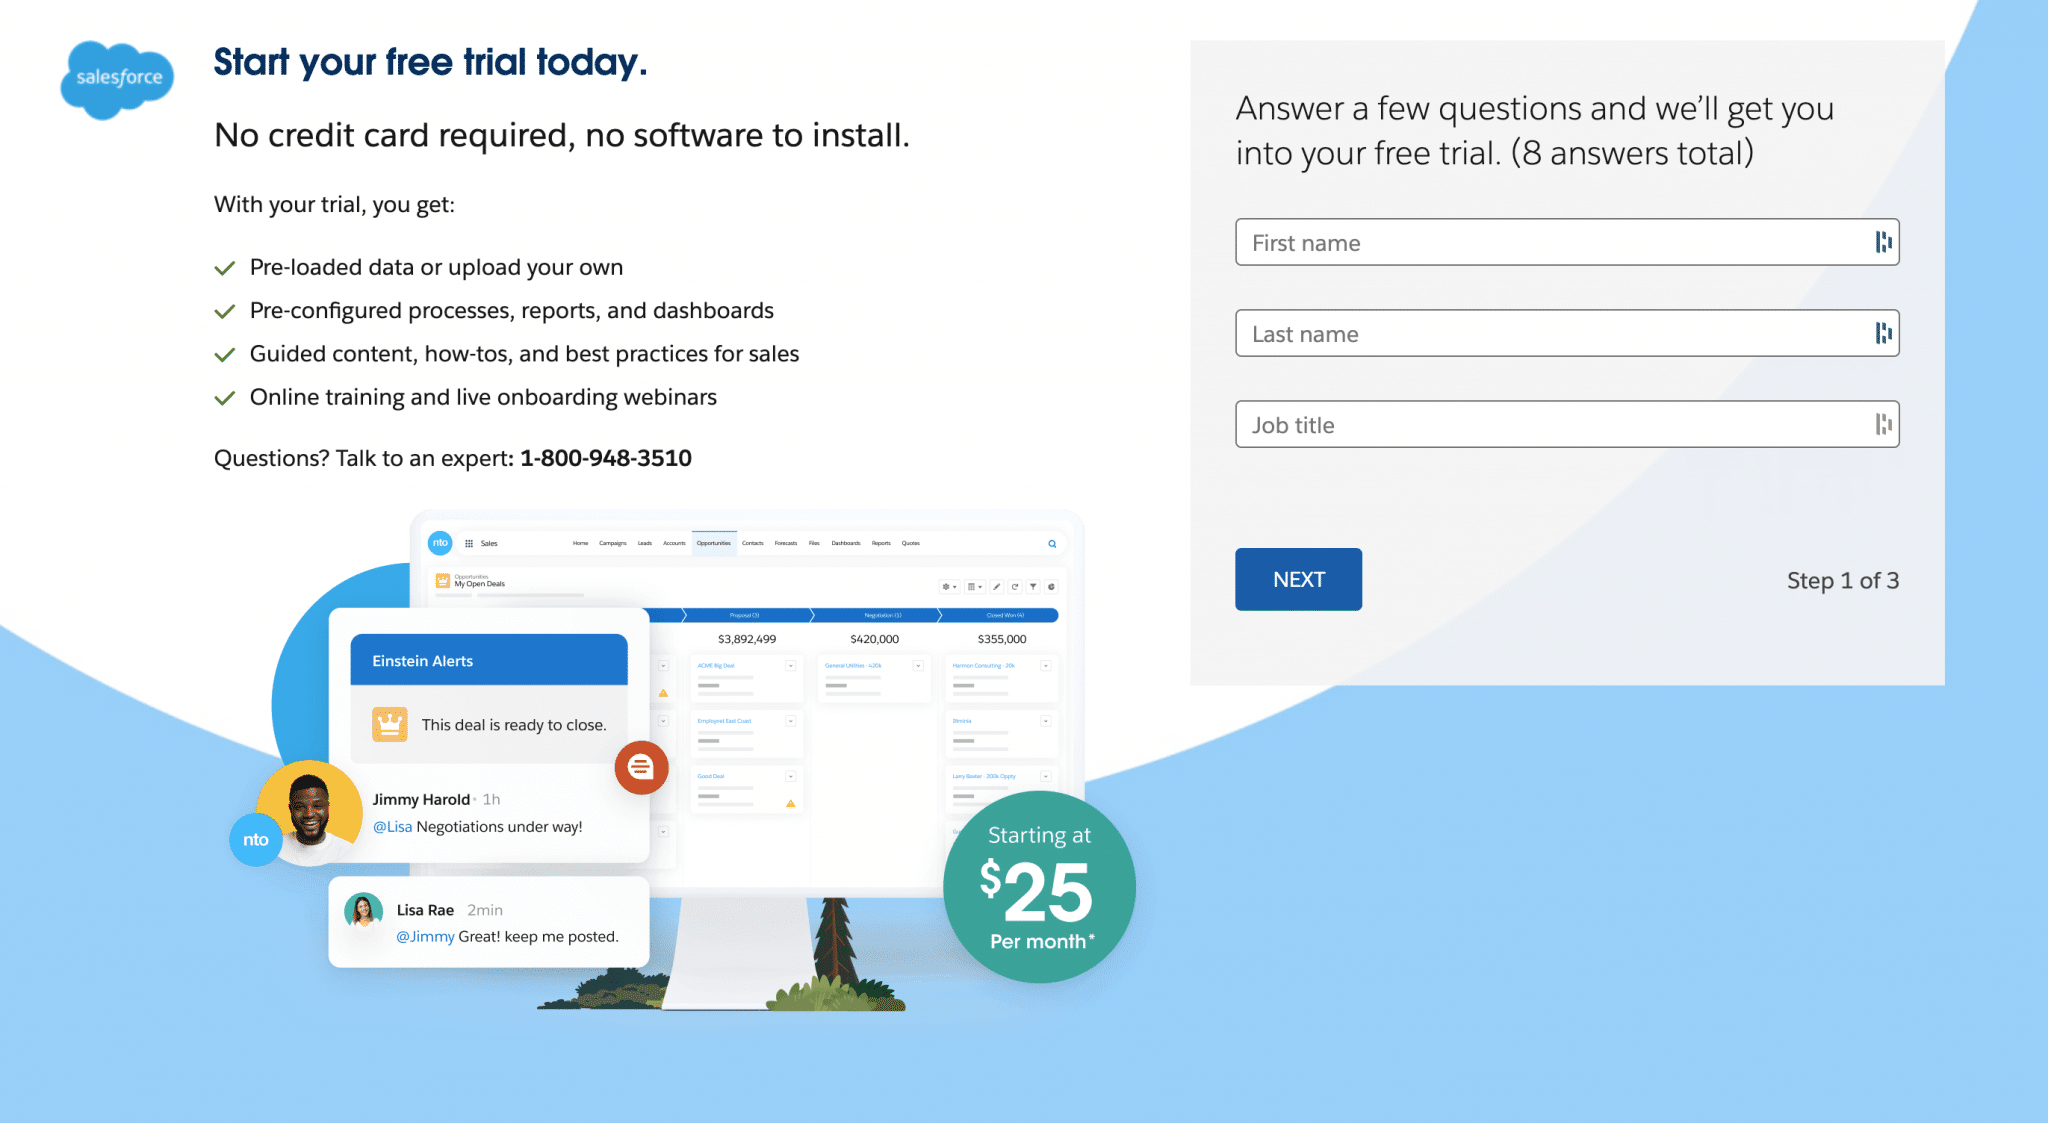 Salesforce landing page to start your free trial.